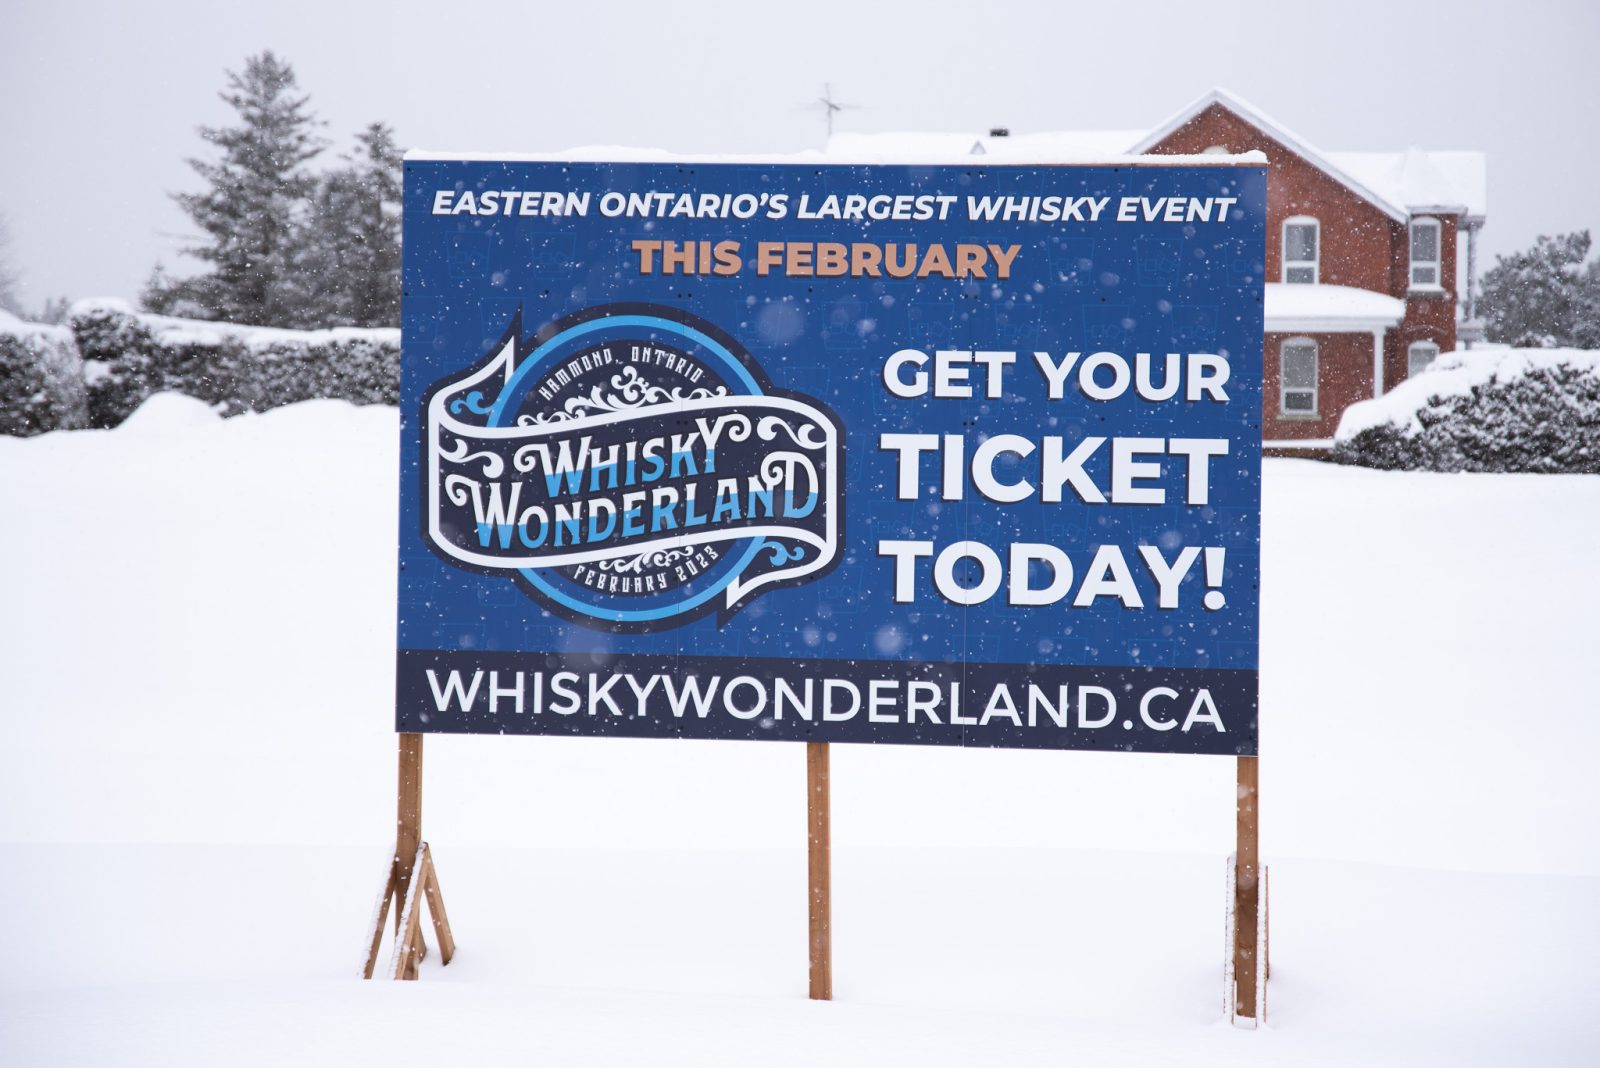 A Wonderland of Whisky Coming to Hammond